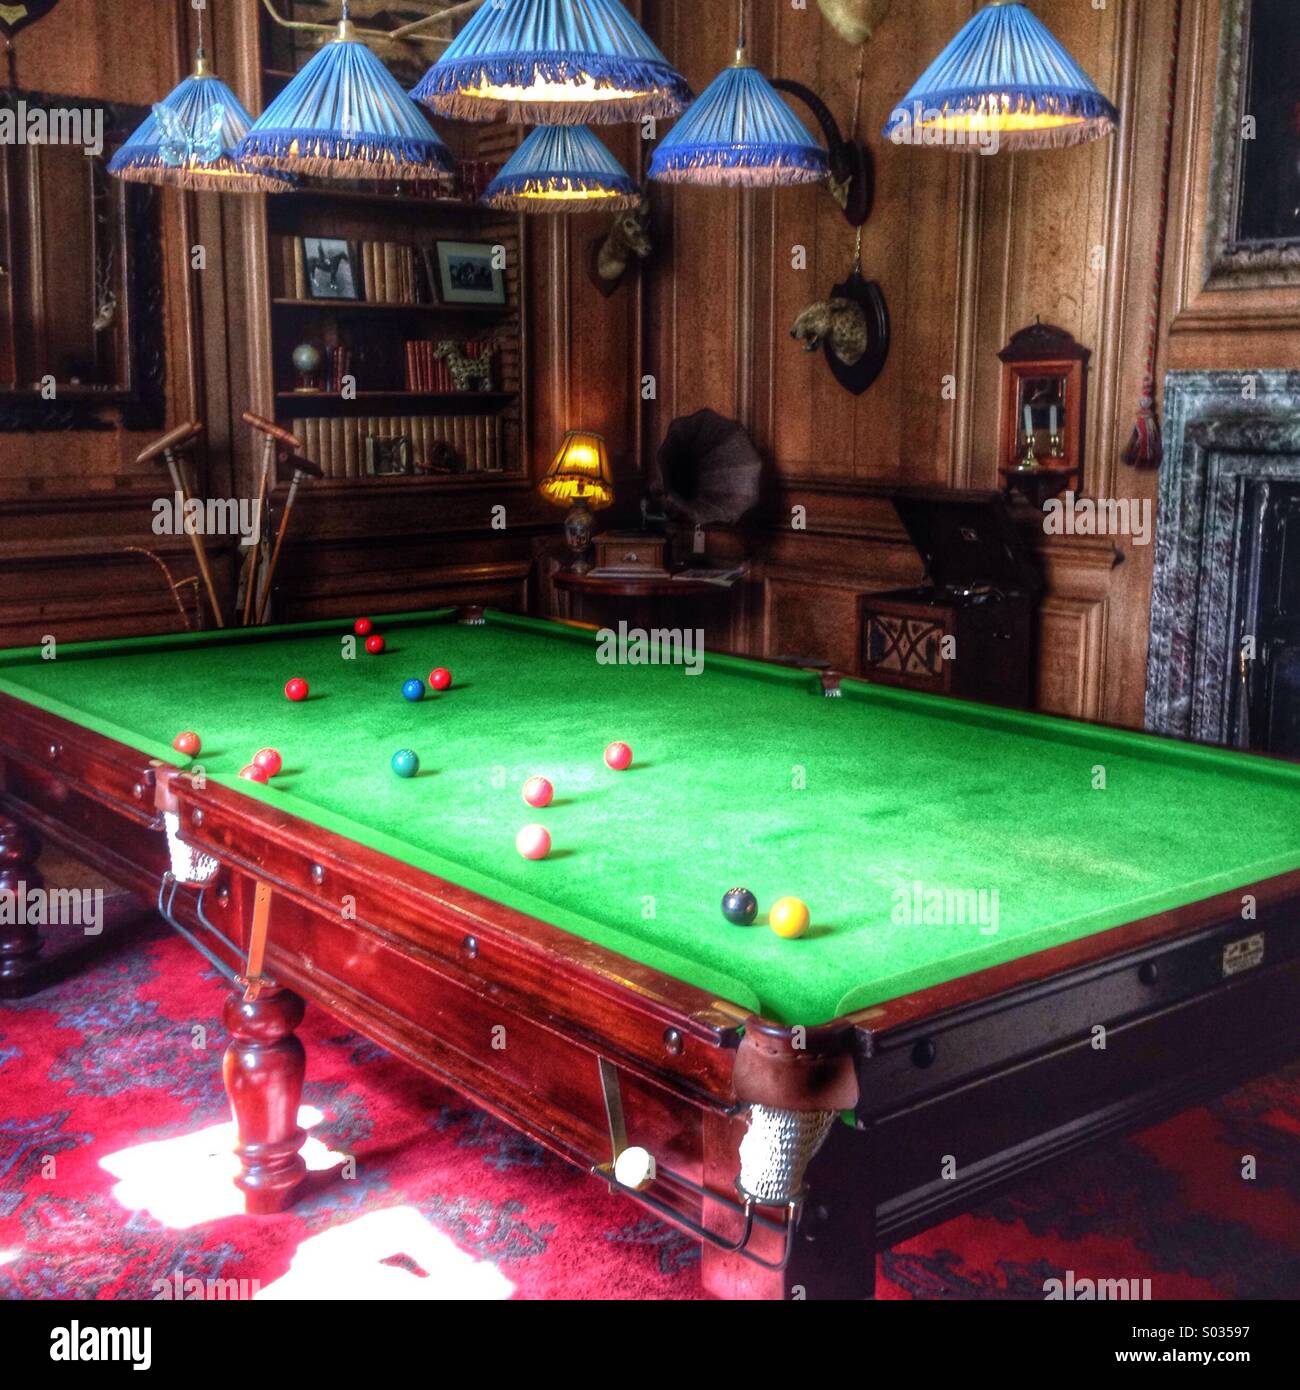 Billiard room with snooker table. Stock Photo